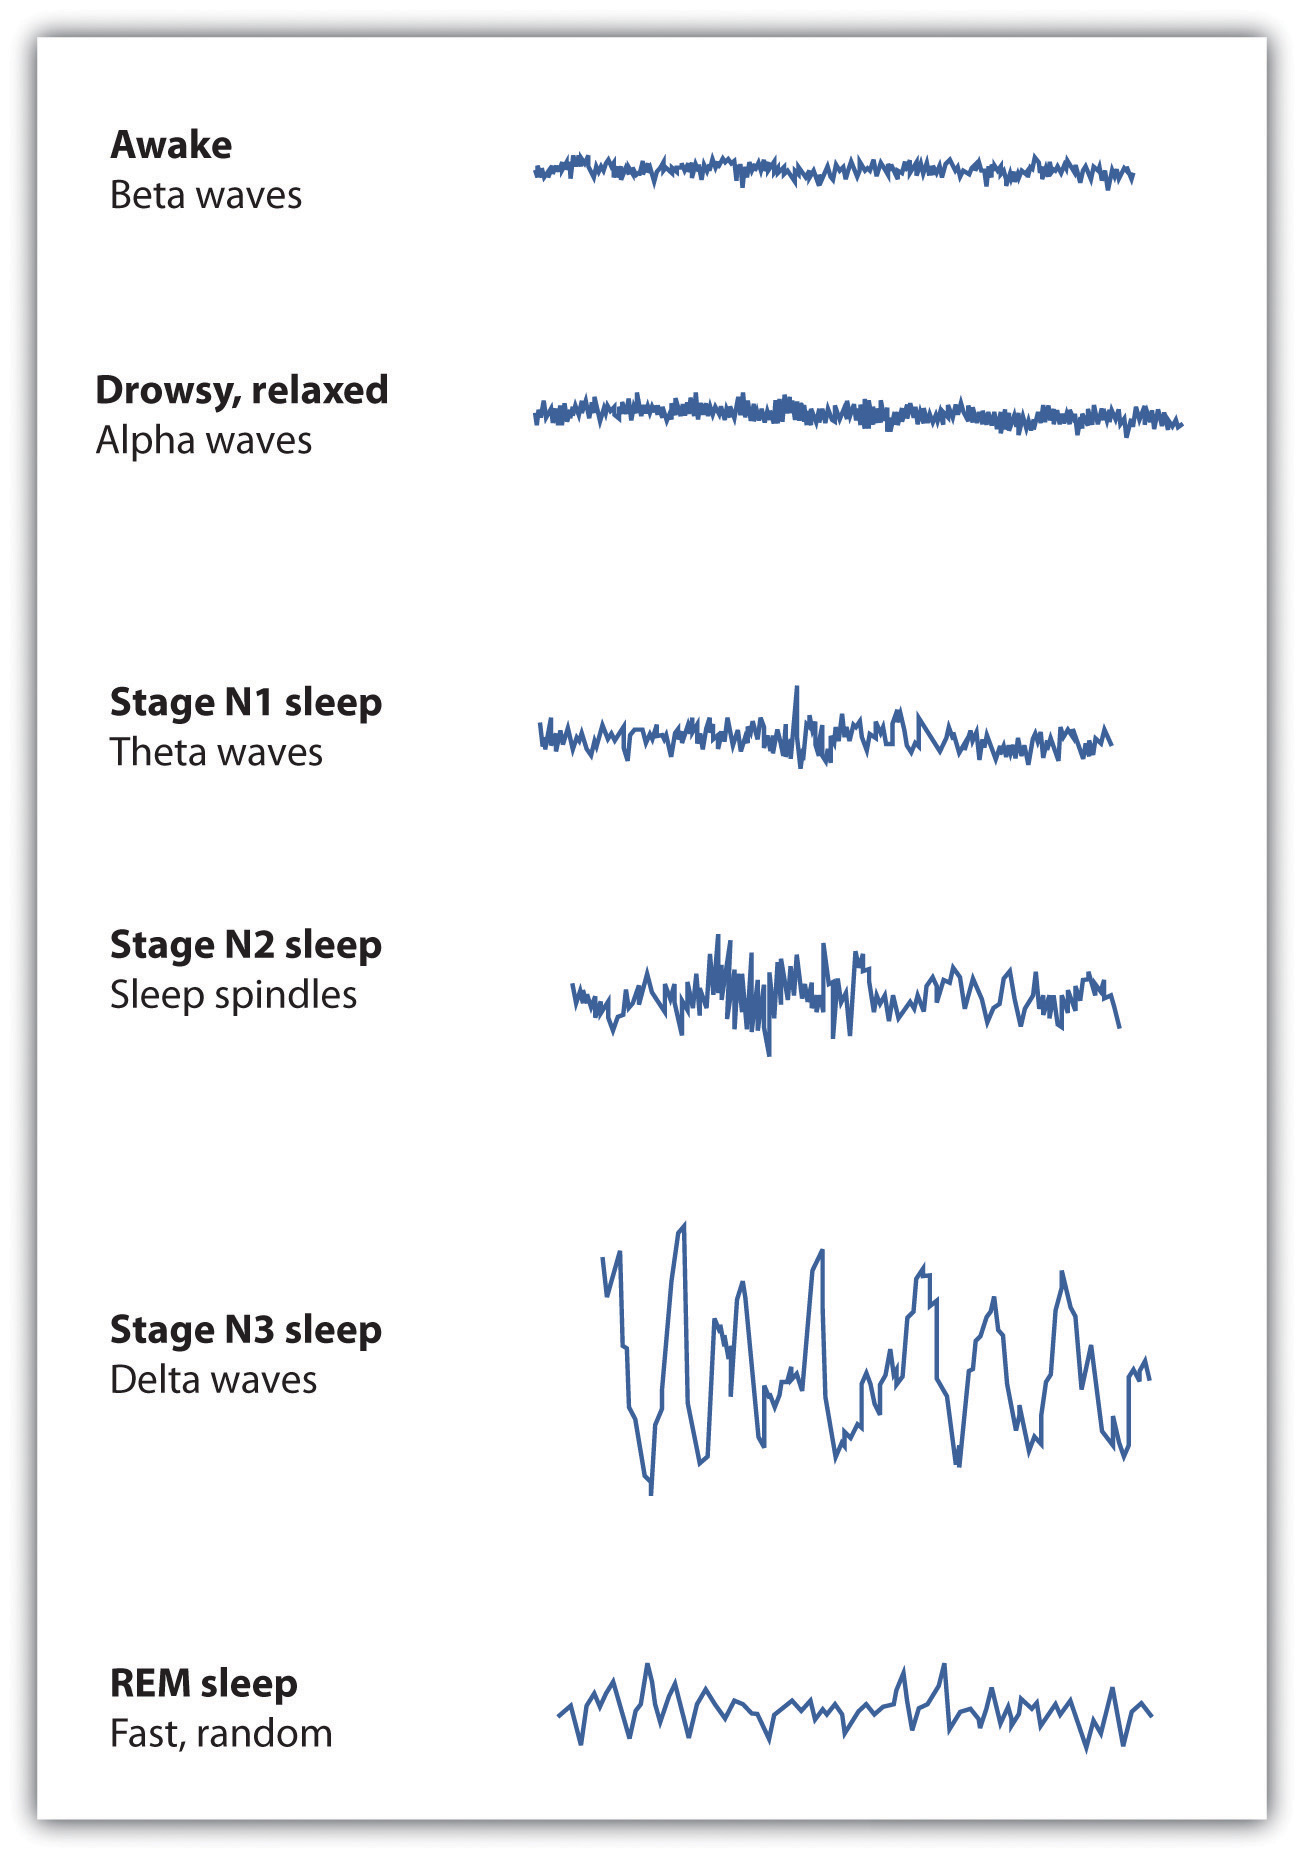 Each stage of sleep has its own distinct pattern of brain activity.